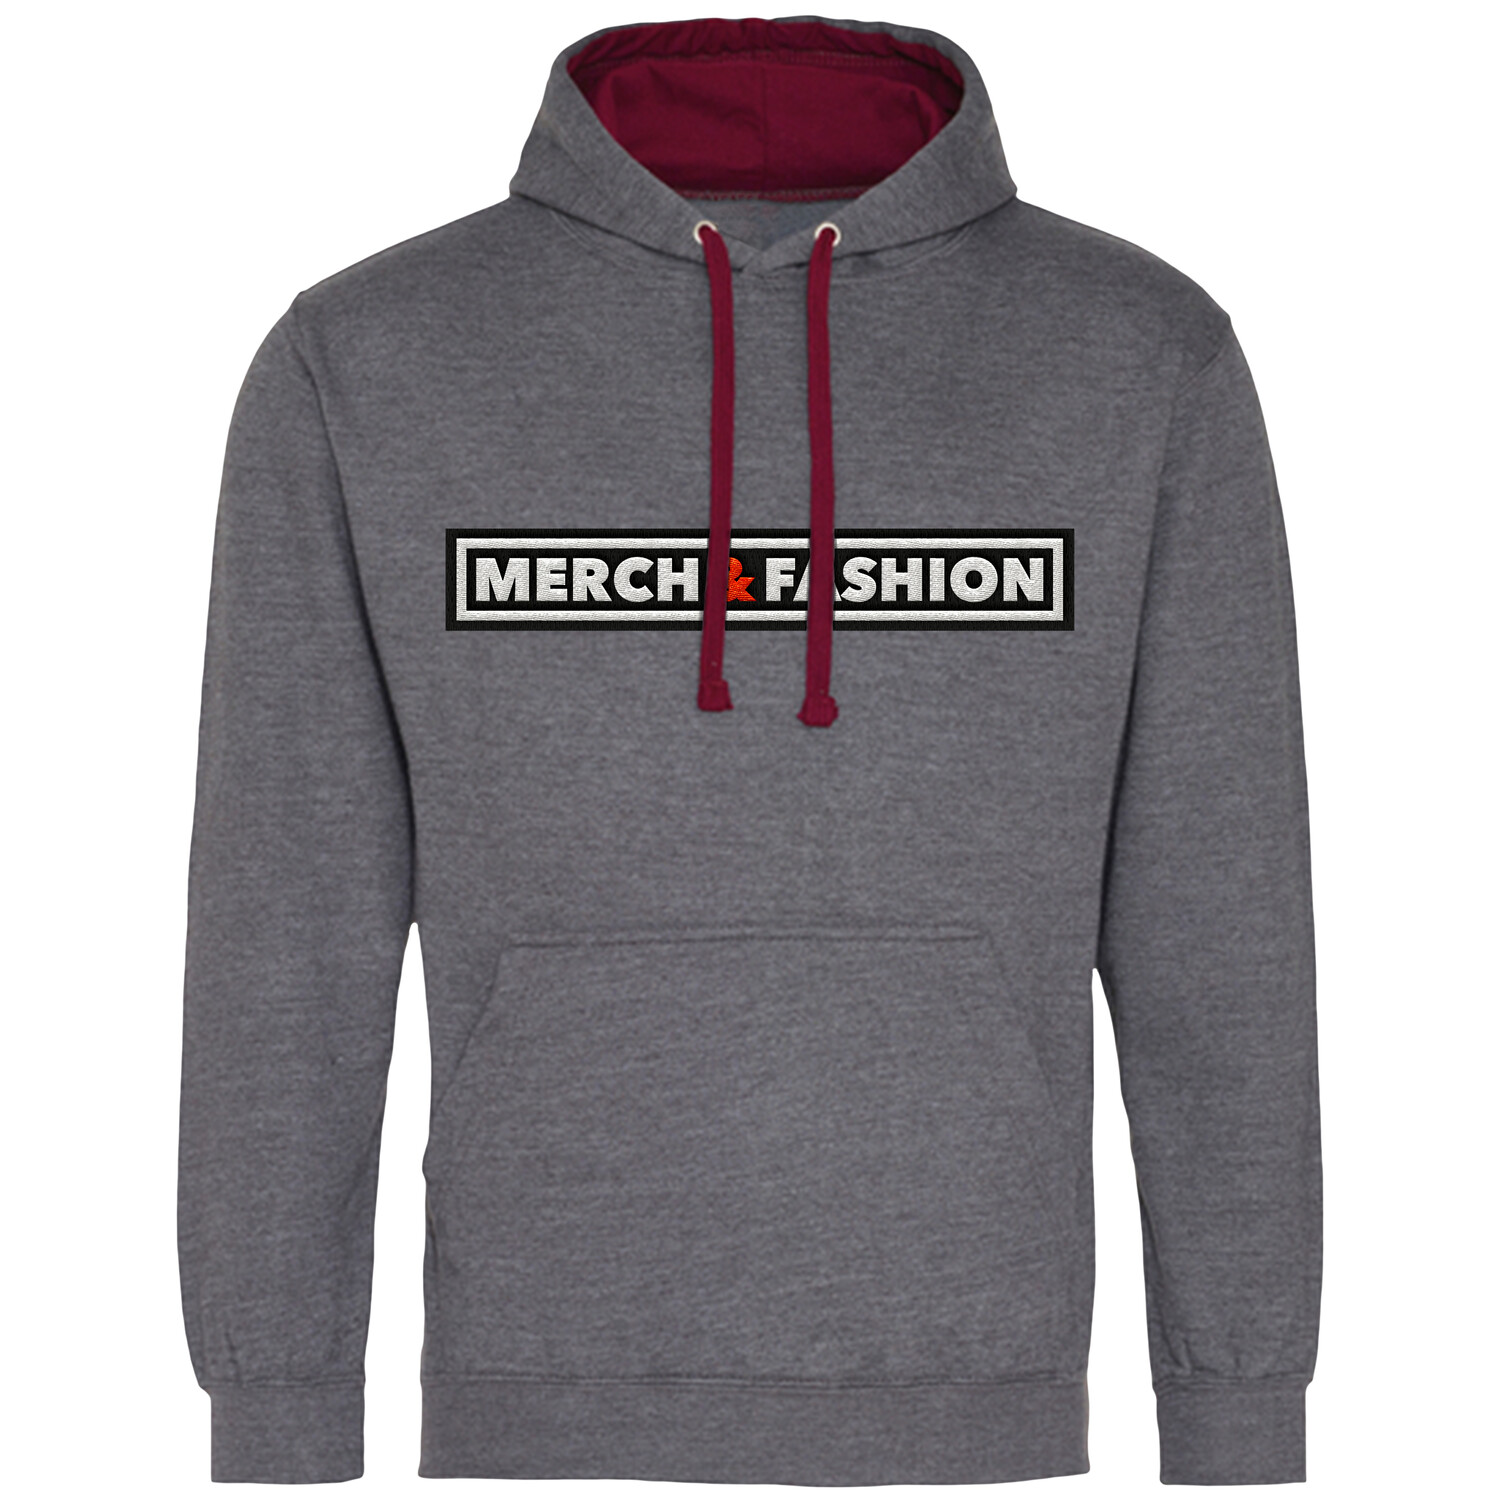 merch_and_fashion_textilien_hoody_01